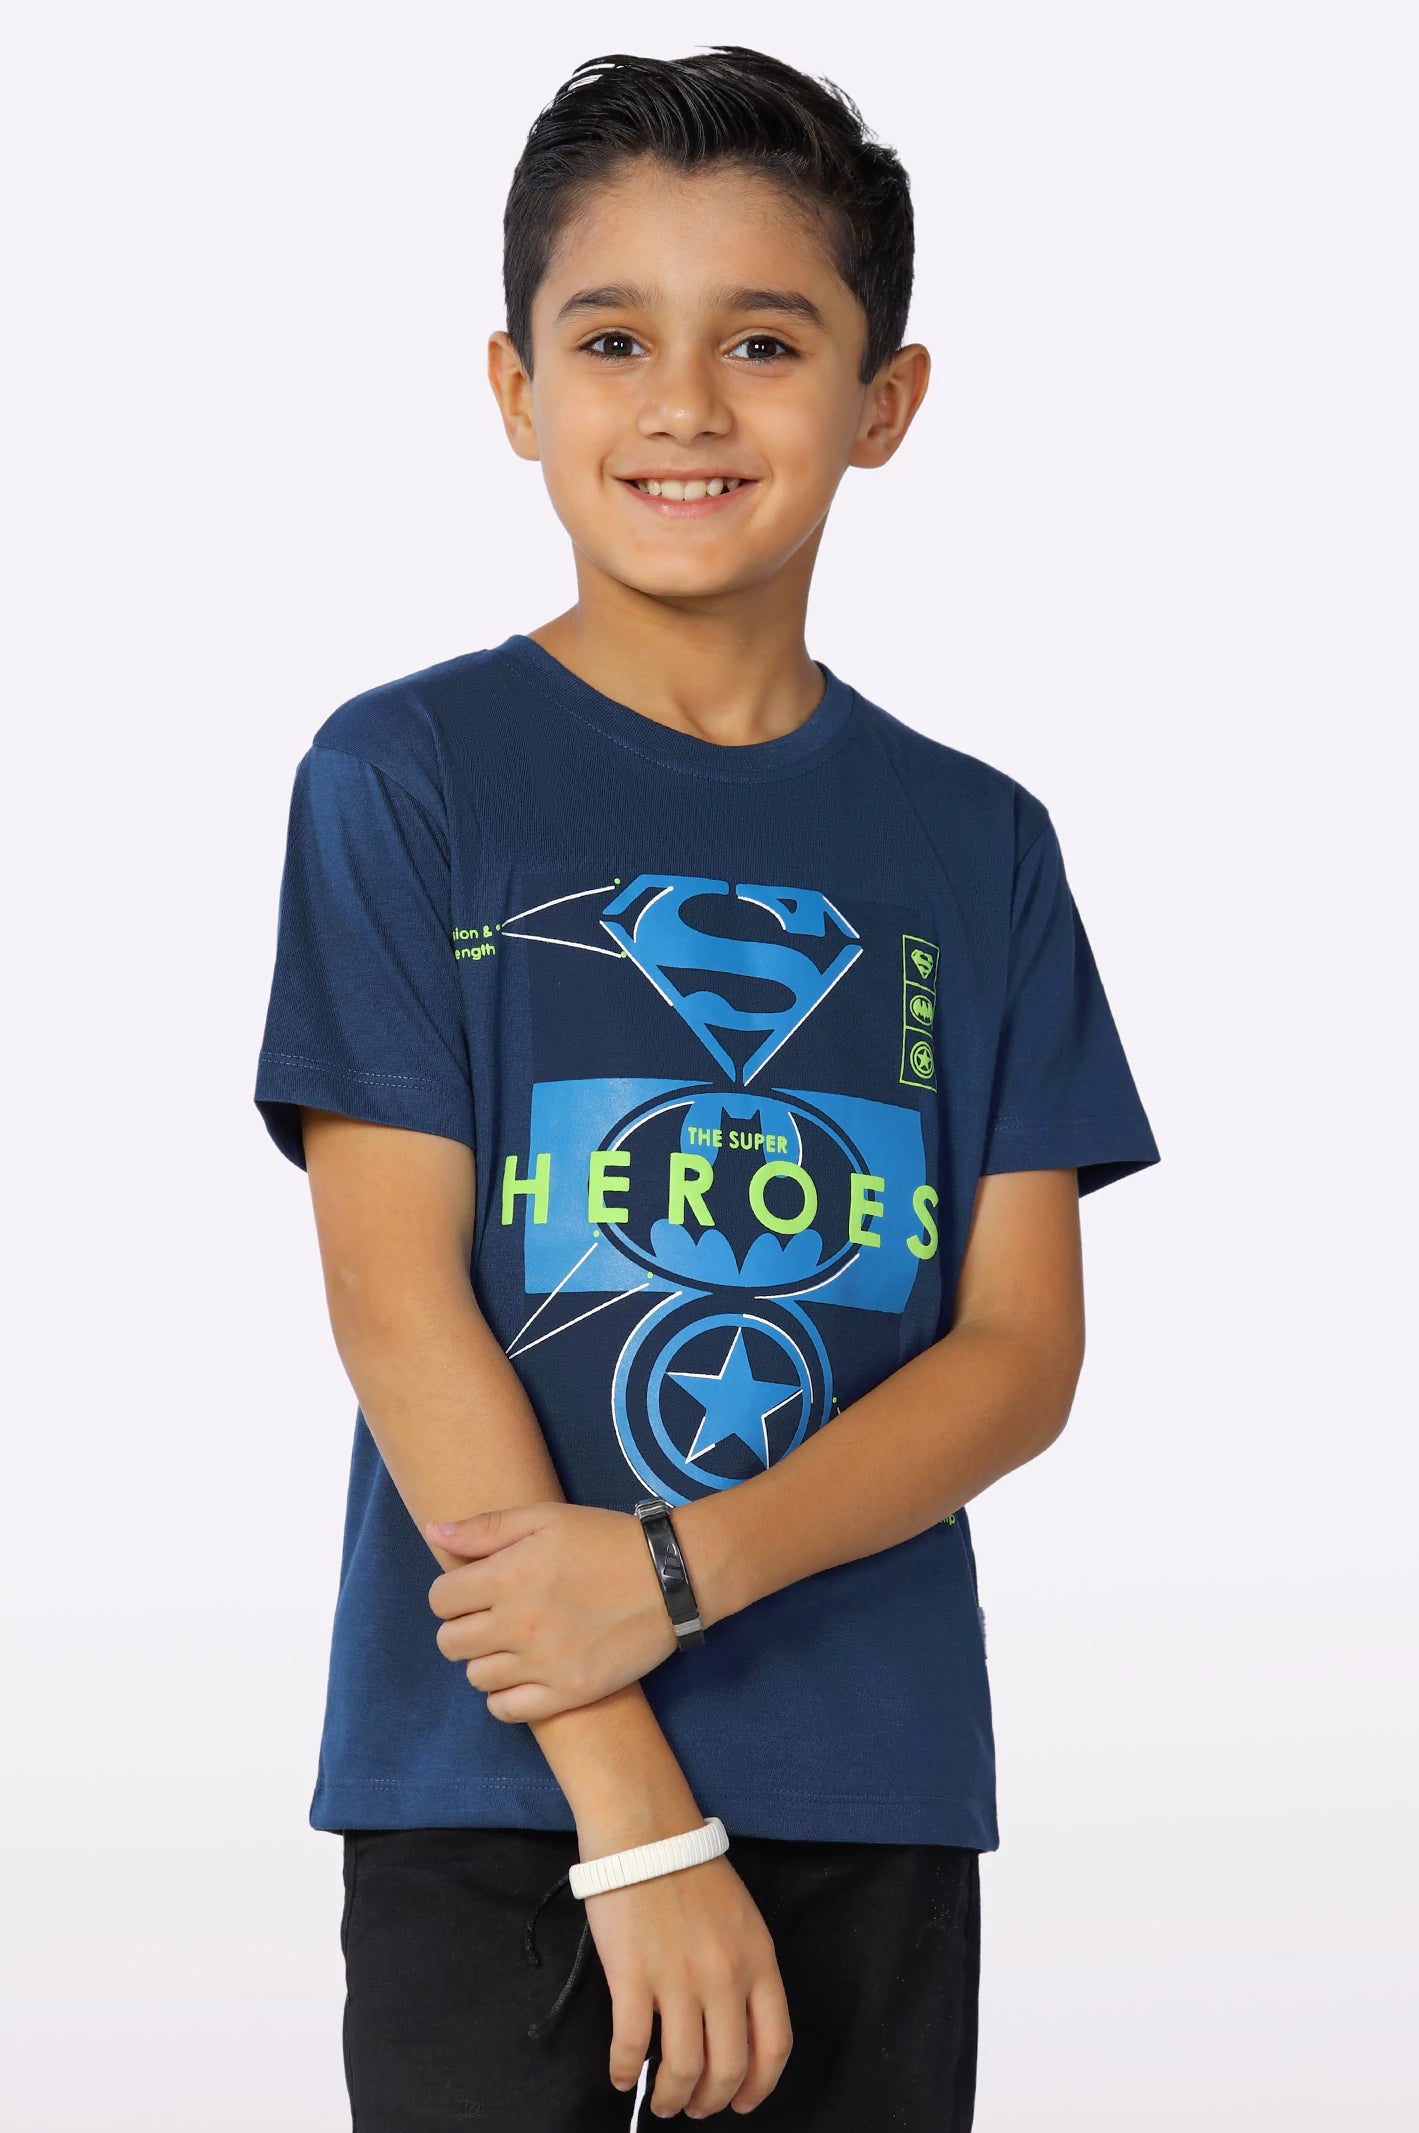 Heroes Graphic Printed T-Shirt From Diners